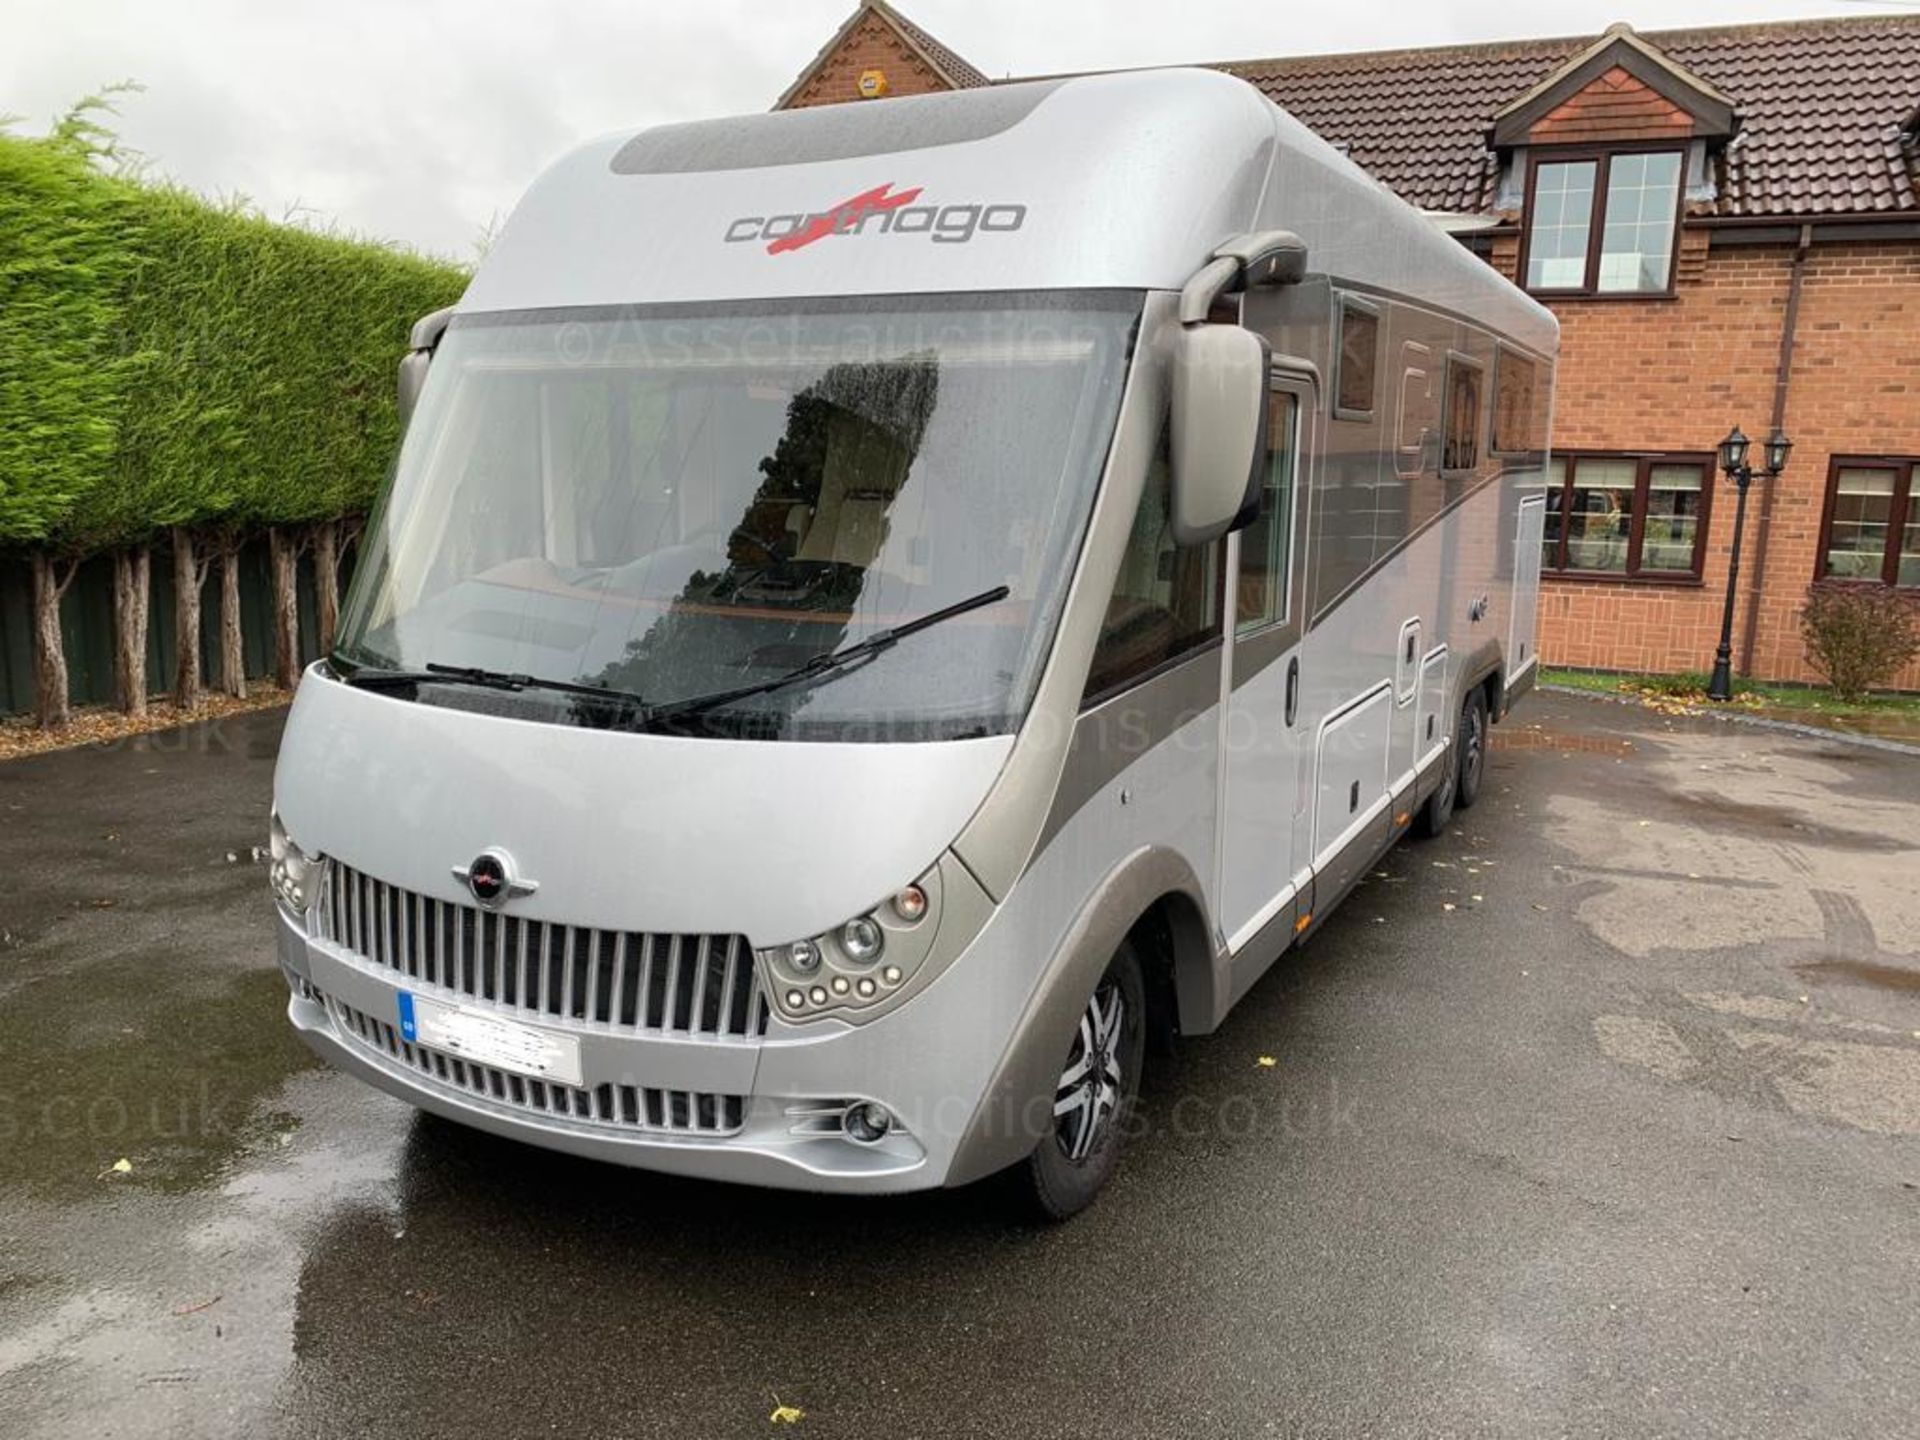 2020 CARTHAGO LINER-FOR-TWO 53L MOTORHOME, SHOWING 4529 MILES, MINT CONDITION *NO VAT* - Image 2 of 33